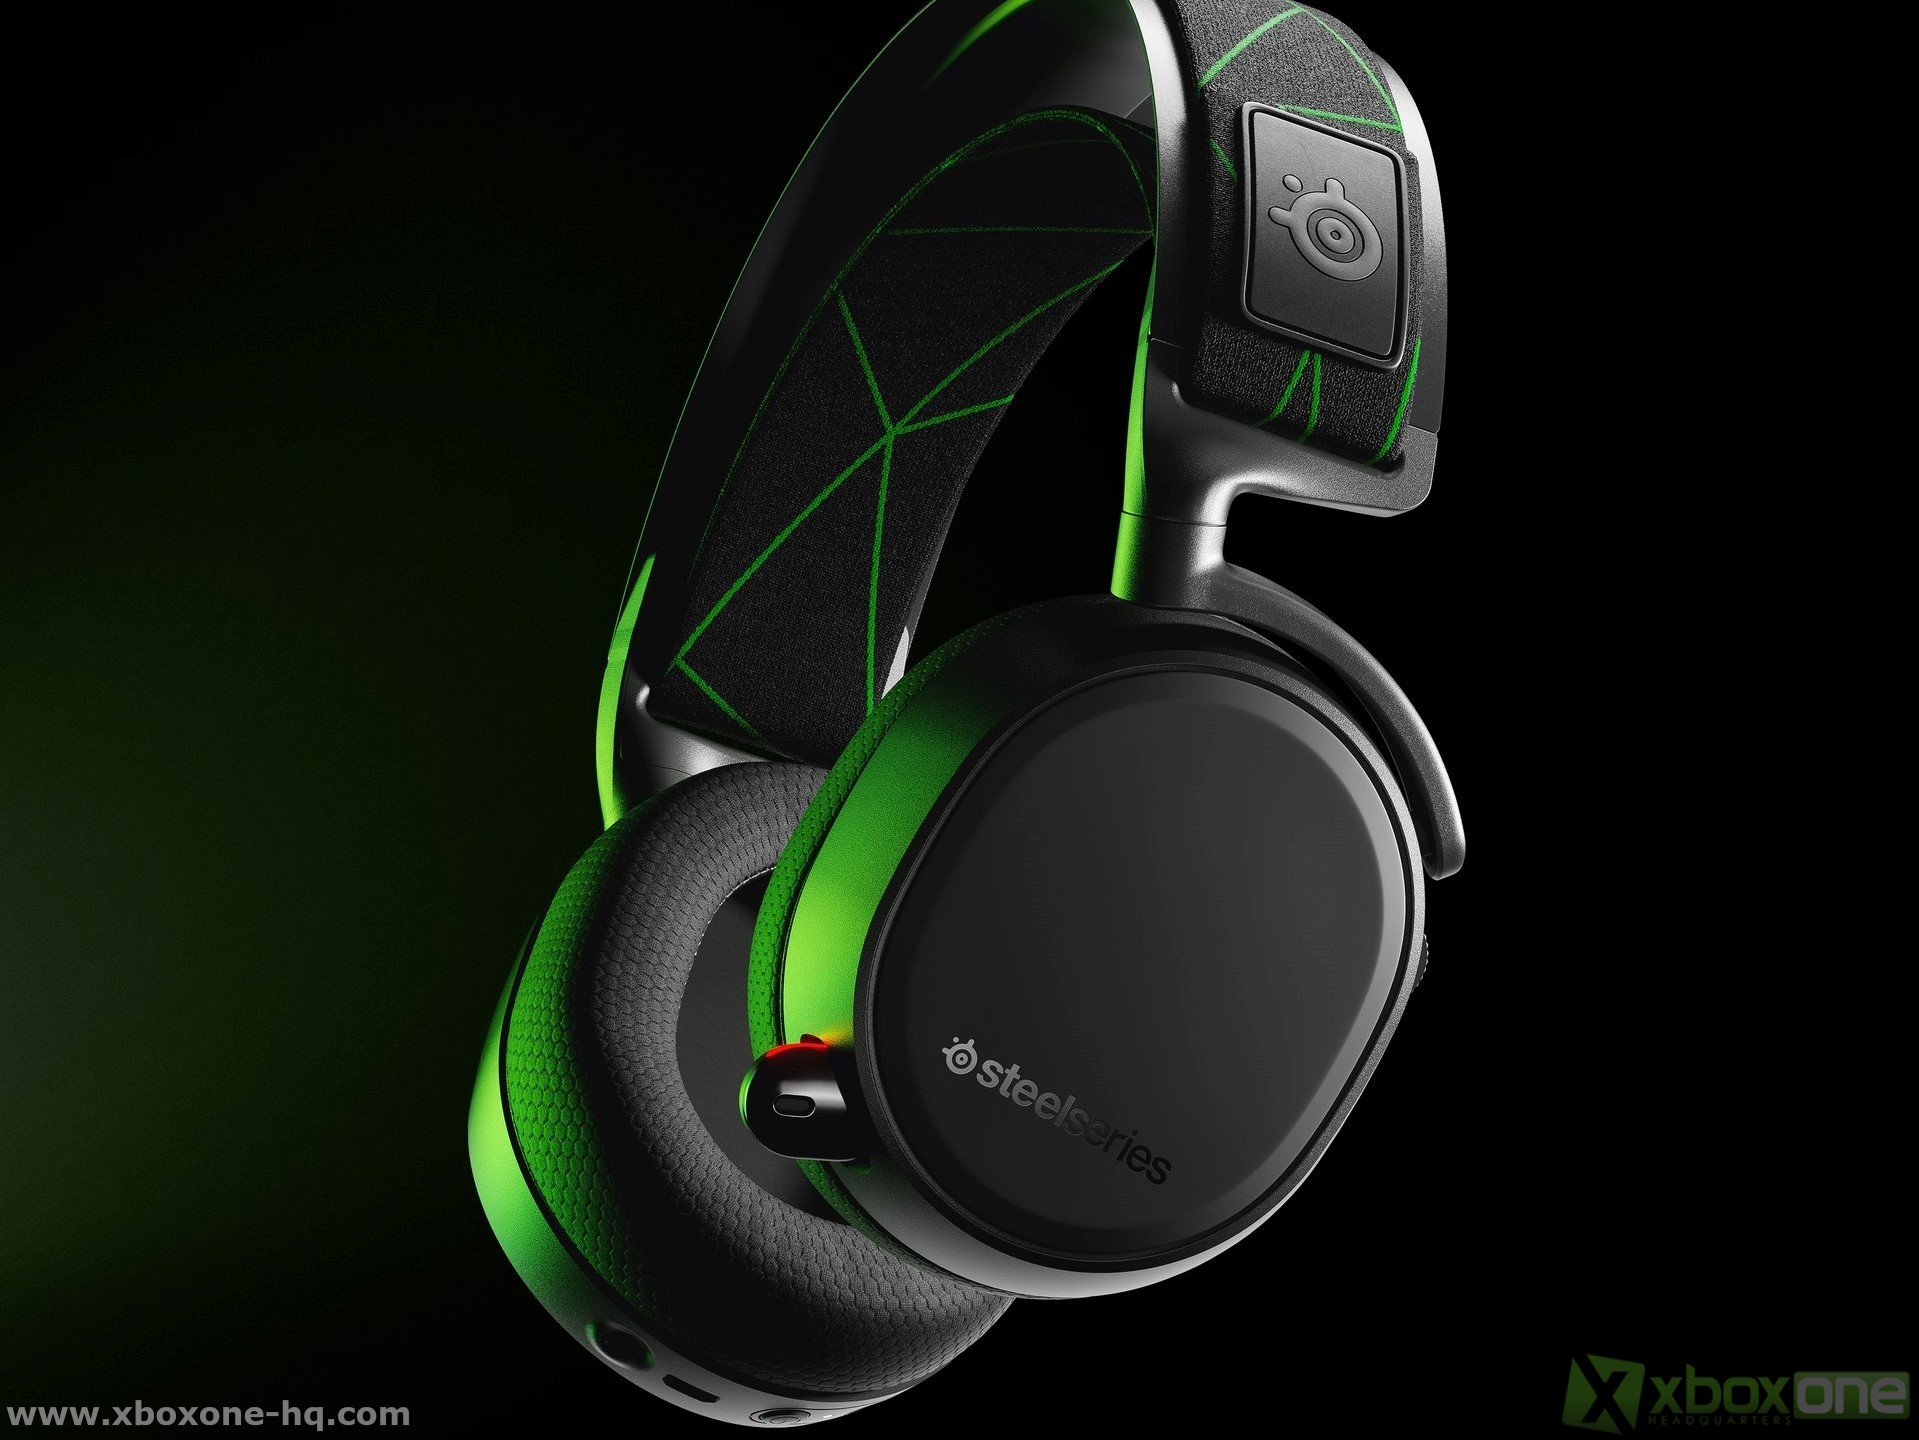 Steel Series Arctis 1 Wireless Headset Release Date Specs News Price And More For Xbox One Xbox One X And Xbox Series X On Xbox One Headquarters